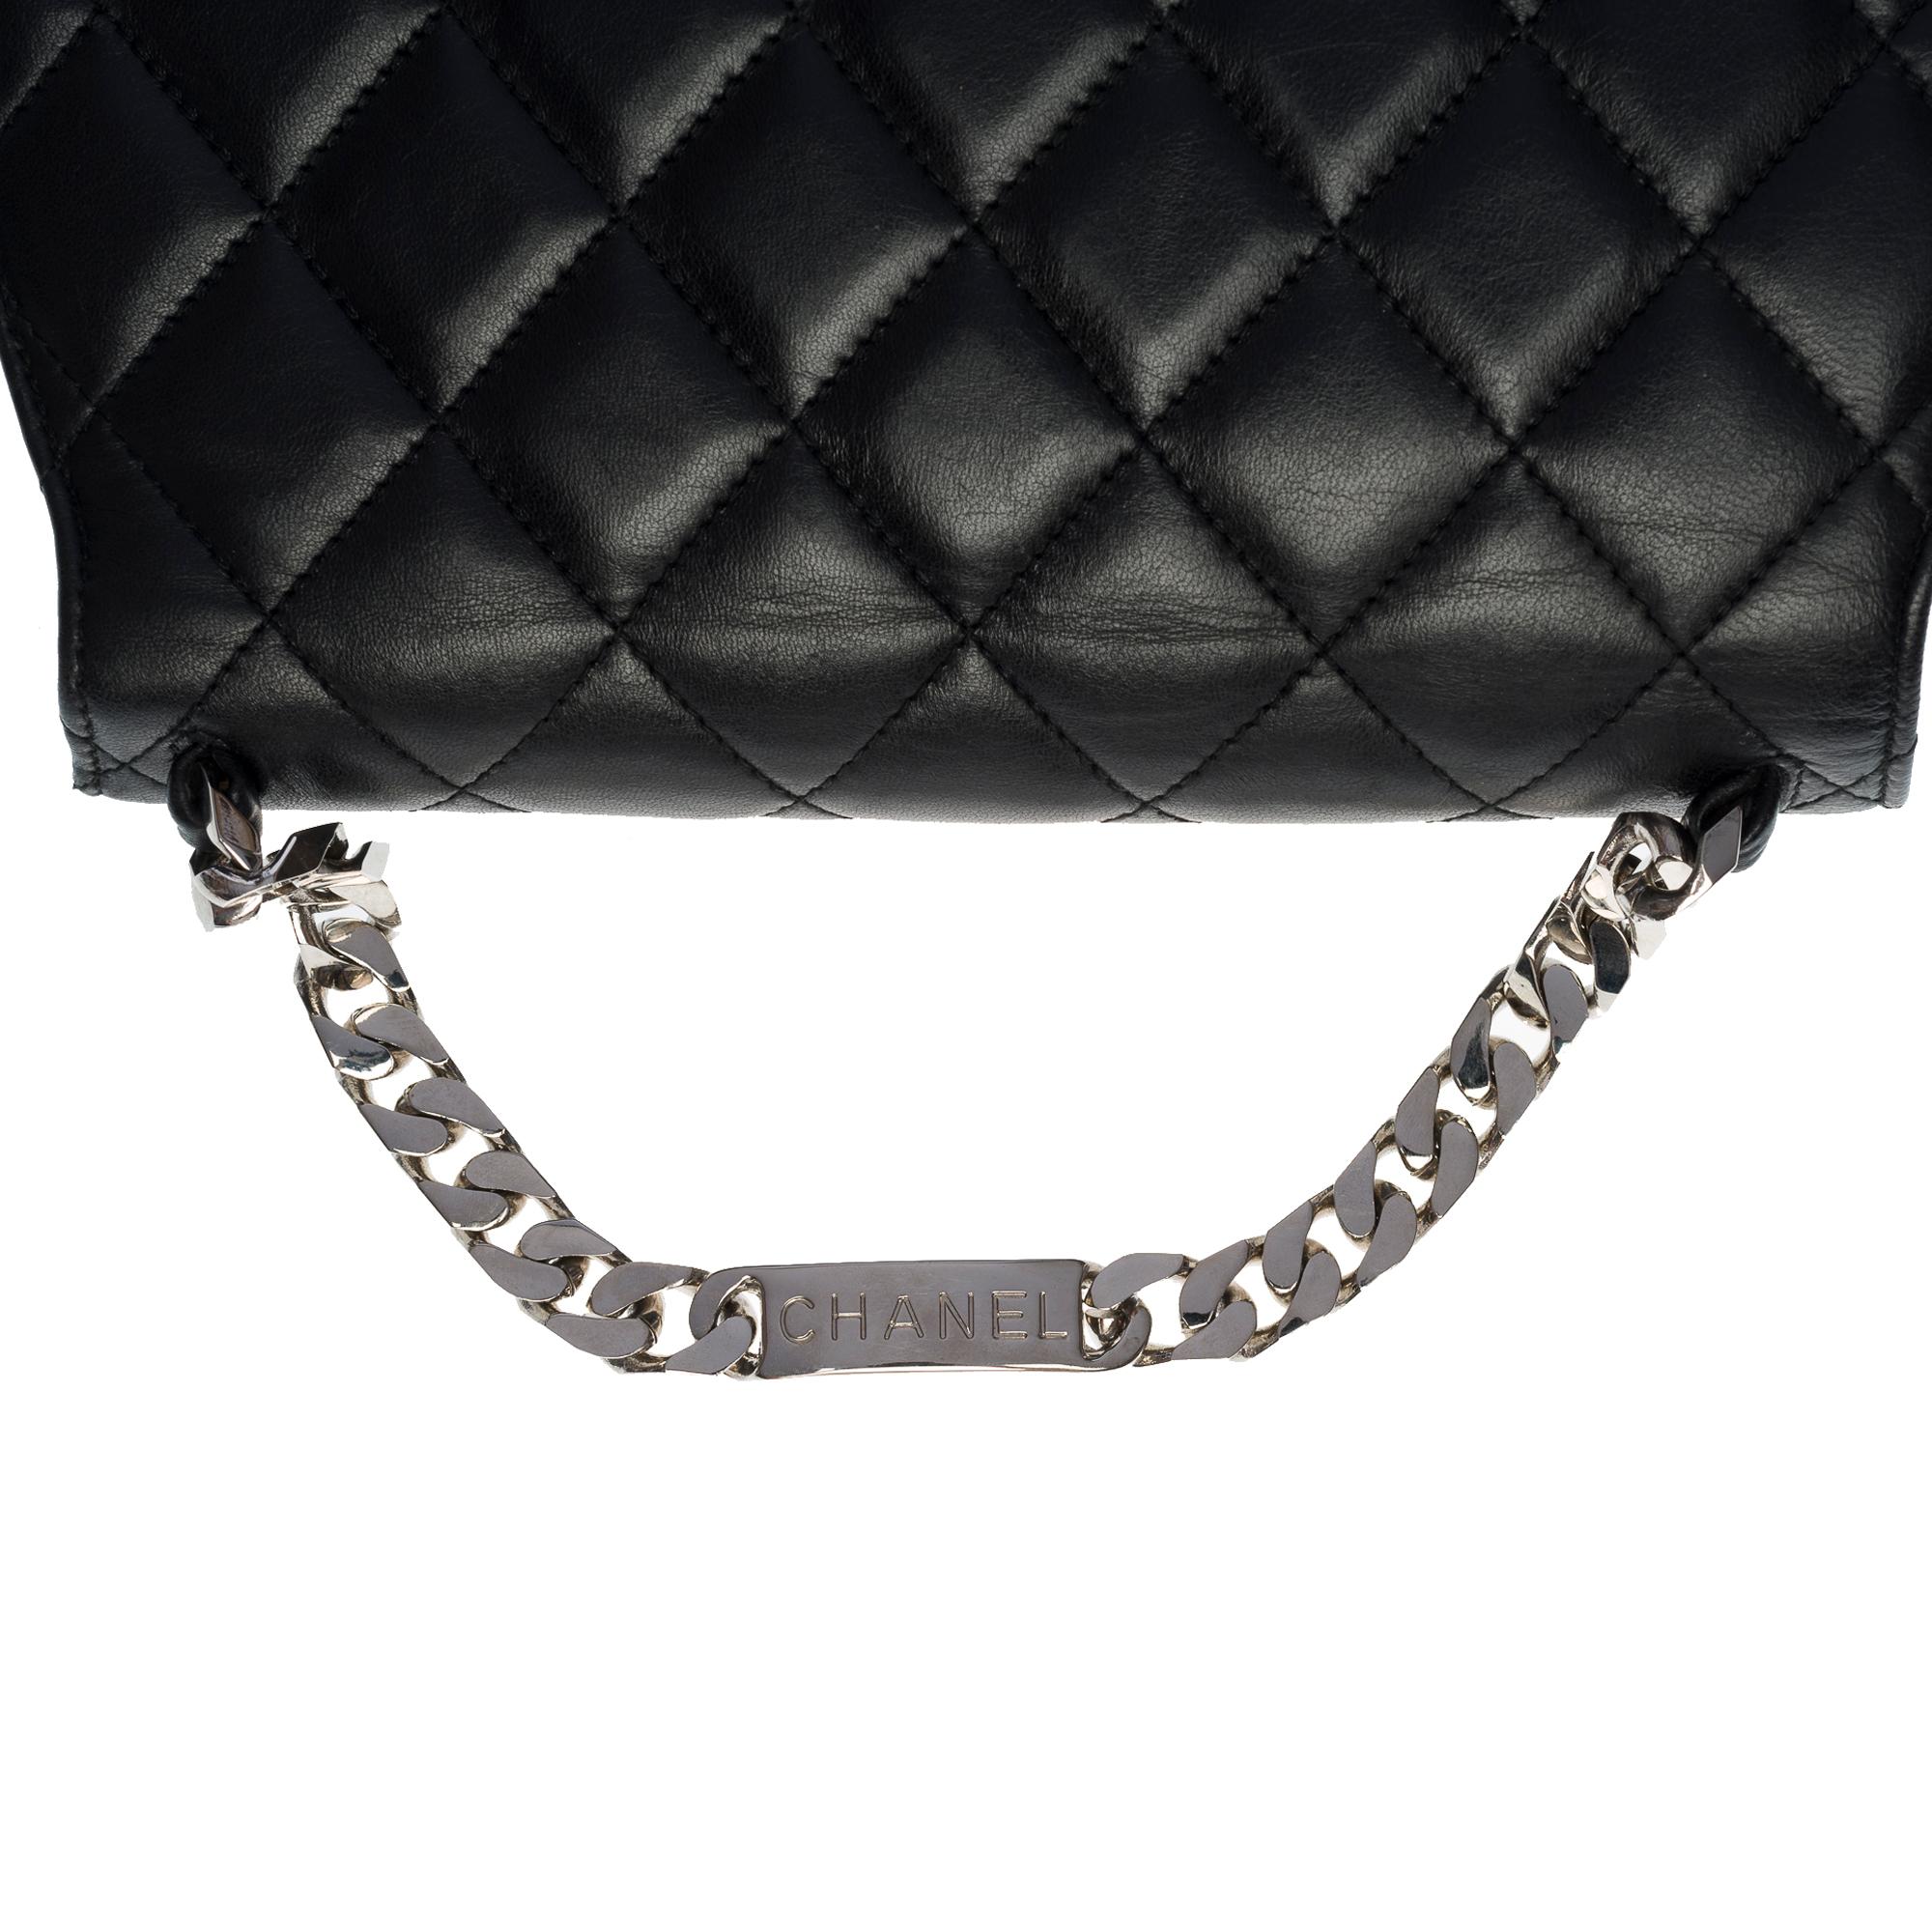 Chanel Trapezoidal flap bag in black quilted lambskin leather, SHW For Sale 3